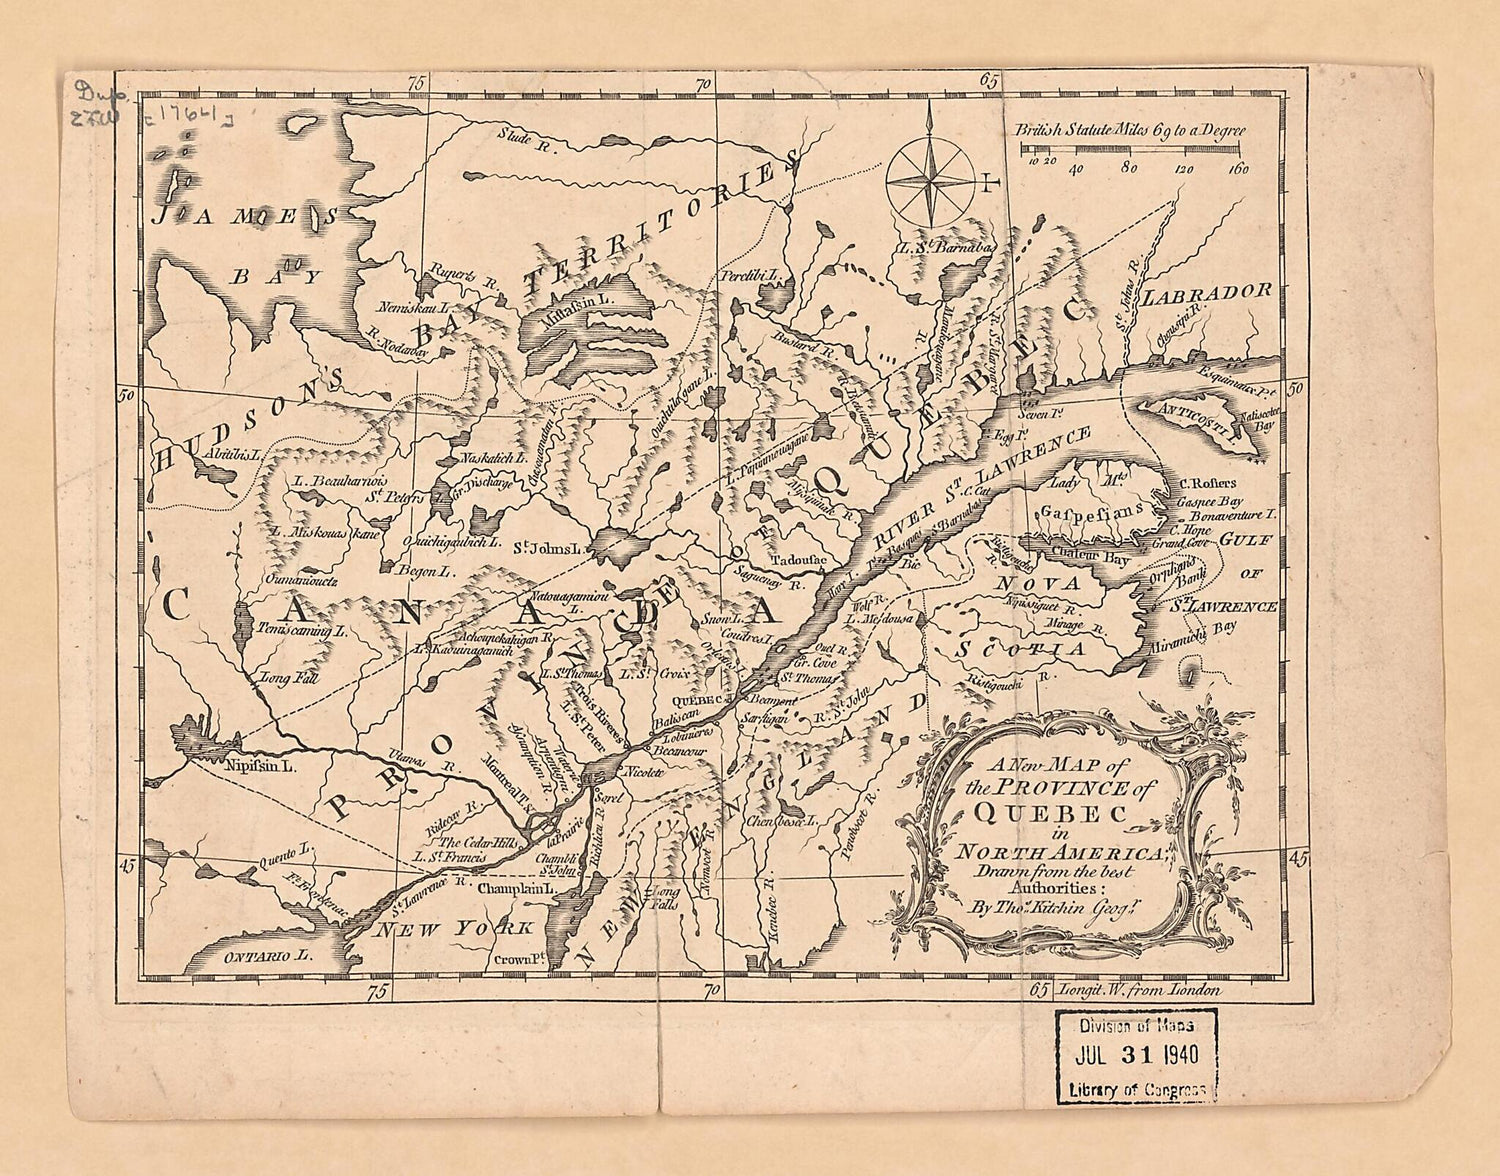 This old map of A New Map of the Province of Quebec In North America from 1763 was created by Thomas Kitchin in 1763